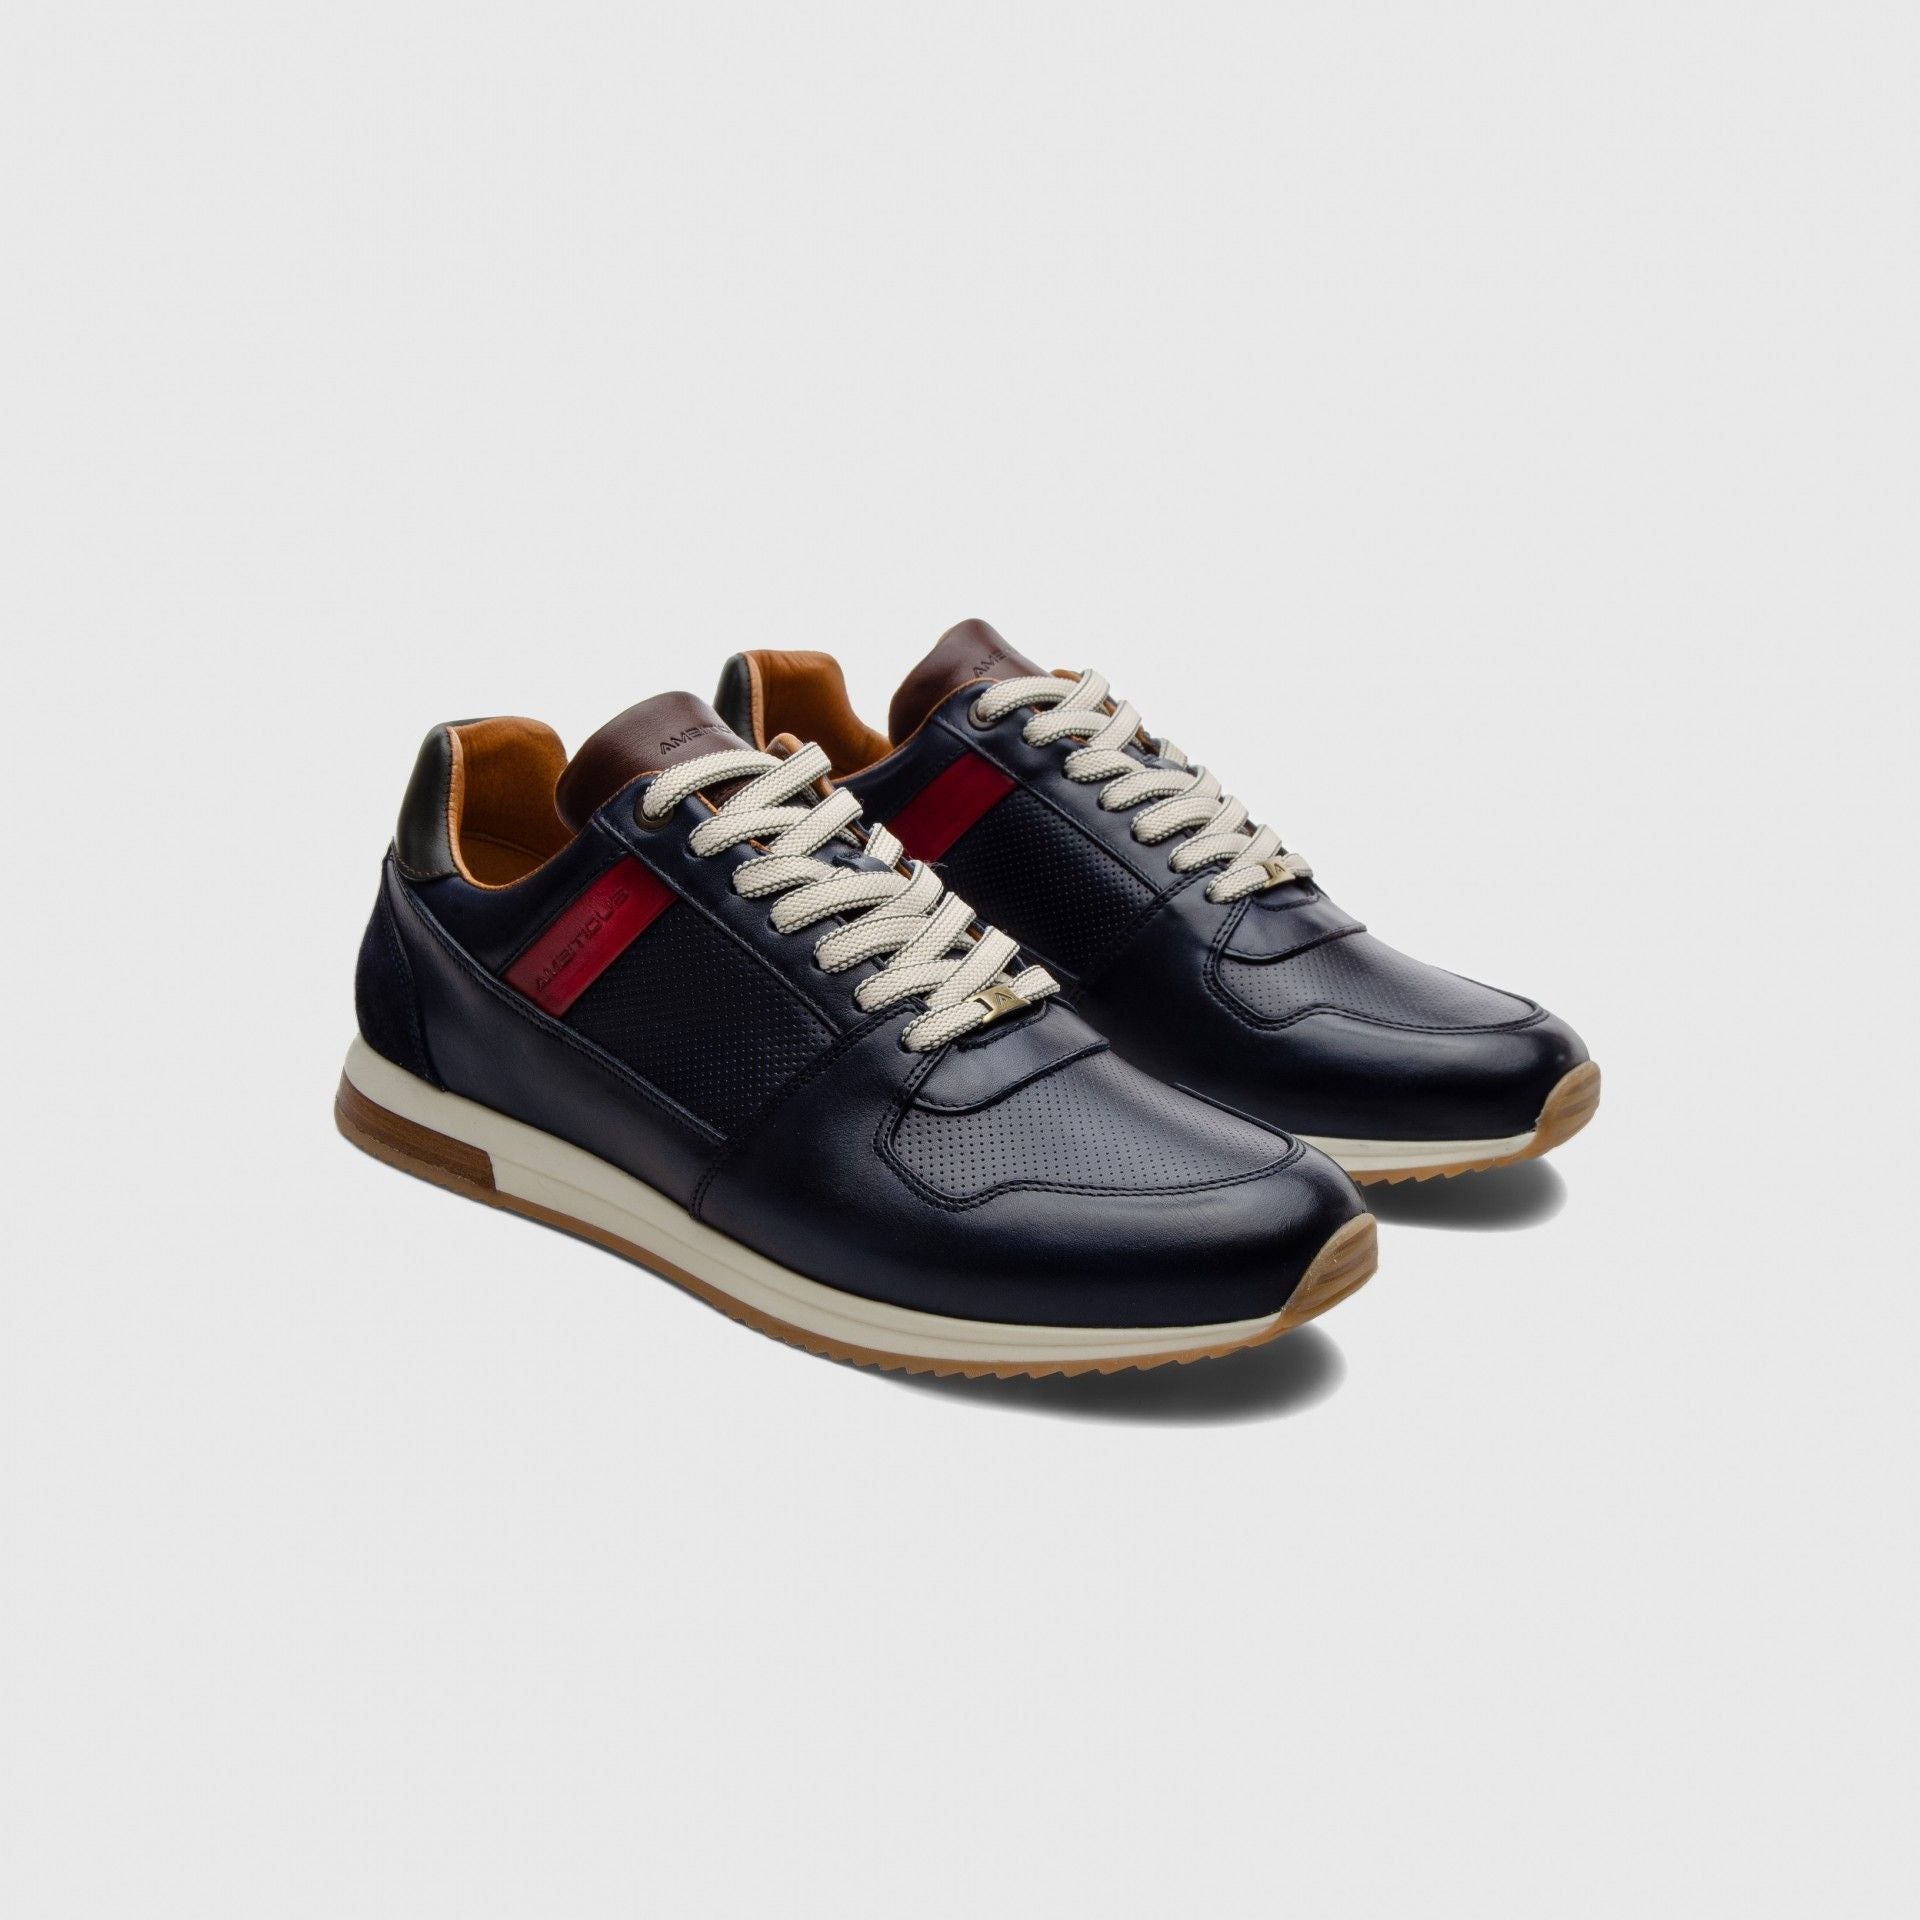 AMBITIOUS Sneakers Uomo - Blu